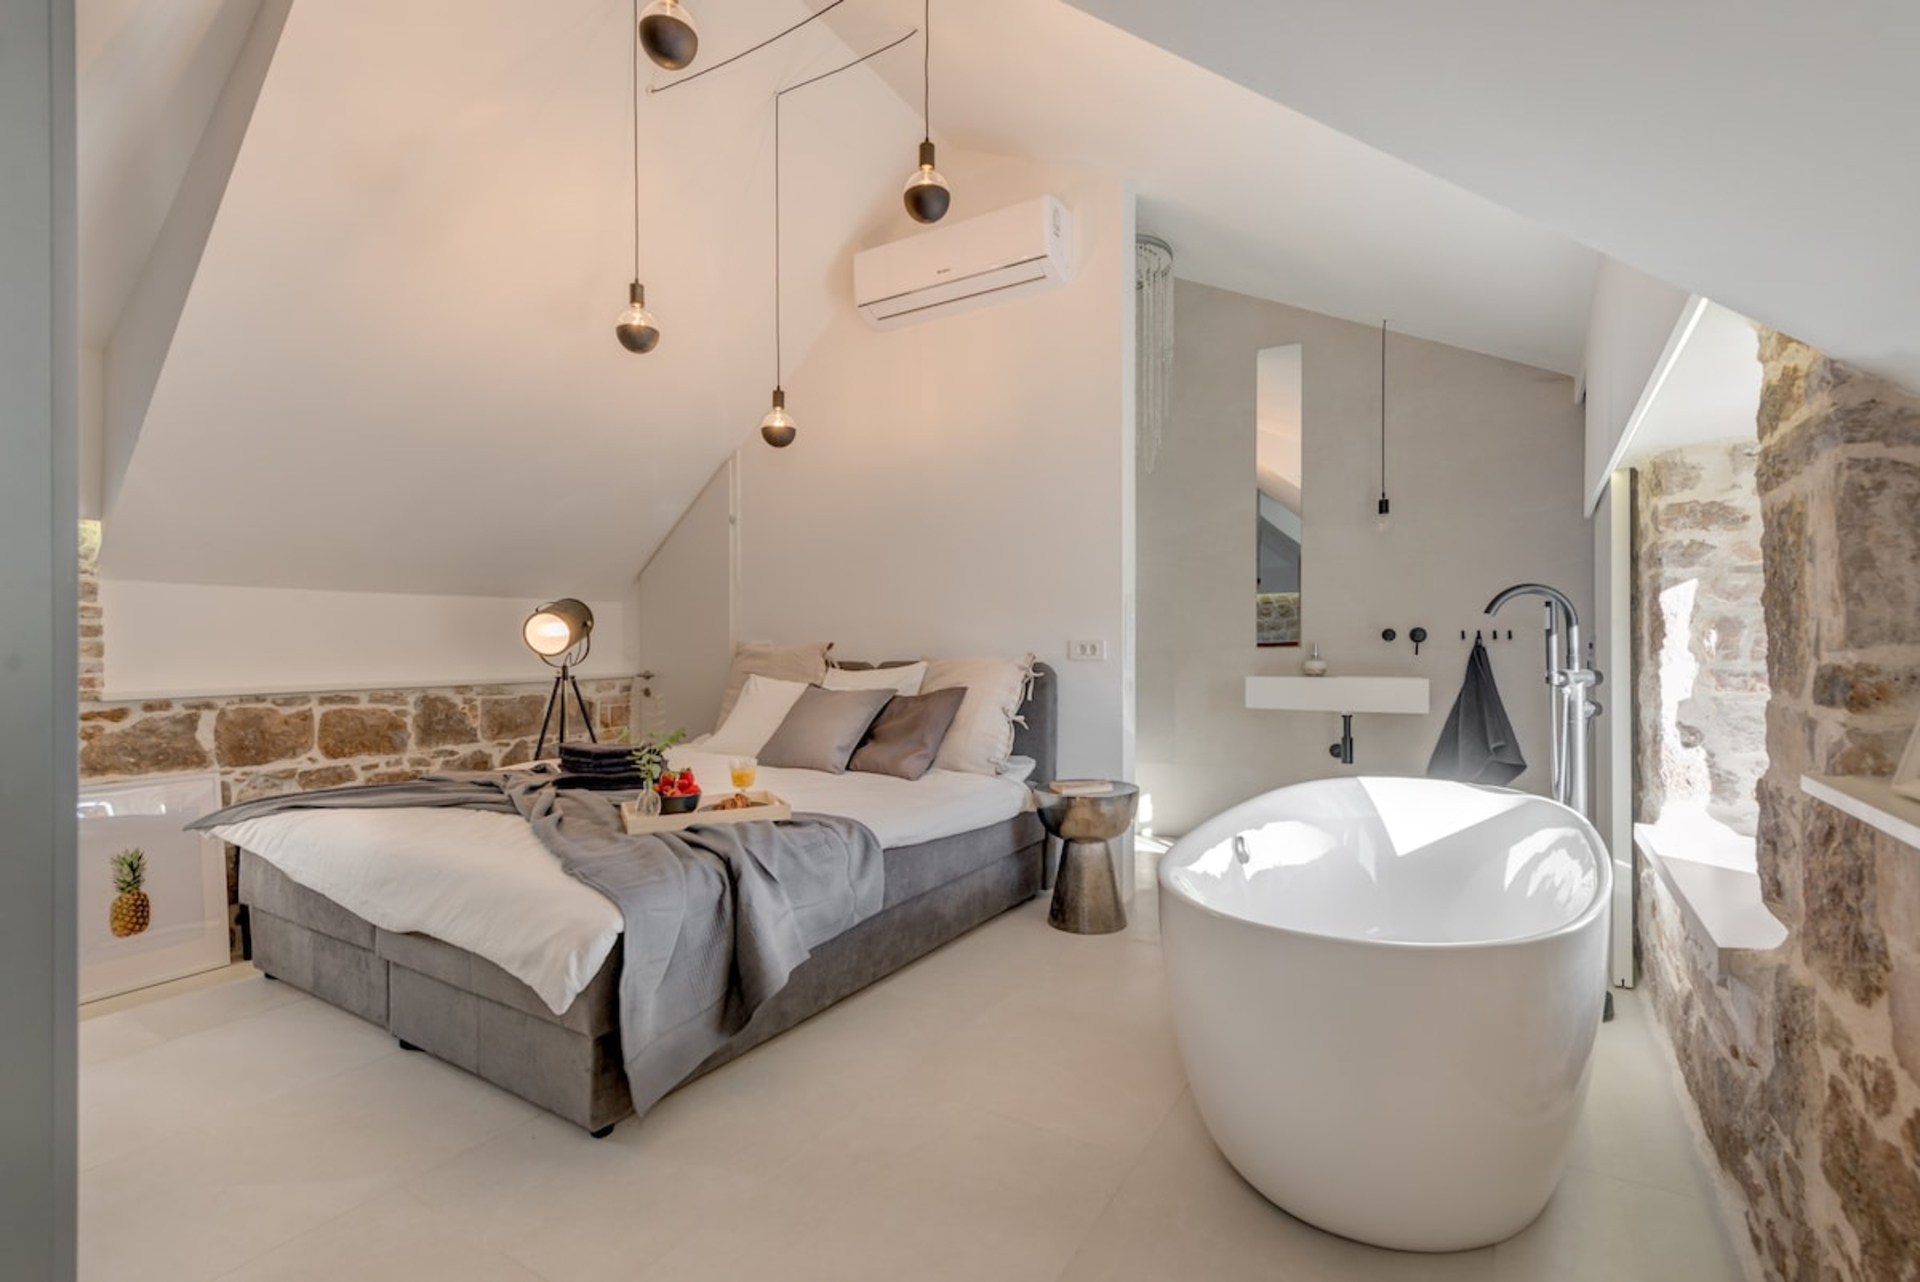 This is the place for your dreams. The big bed is very comfortable (180x200).The jazzy bathtube is one highlight which offers you a lovely view, while relaxing in it.